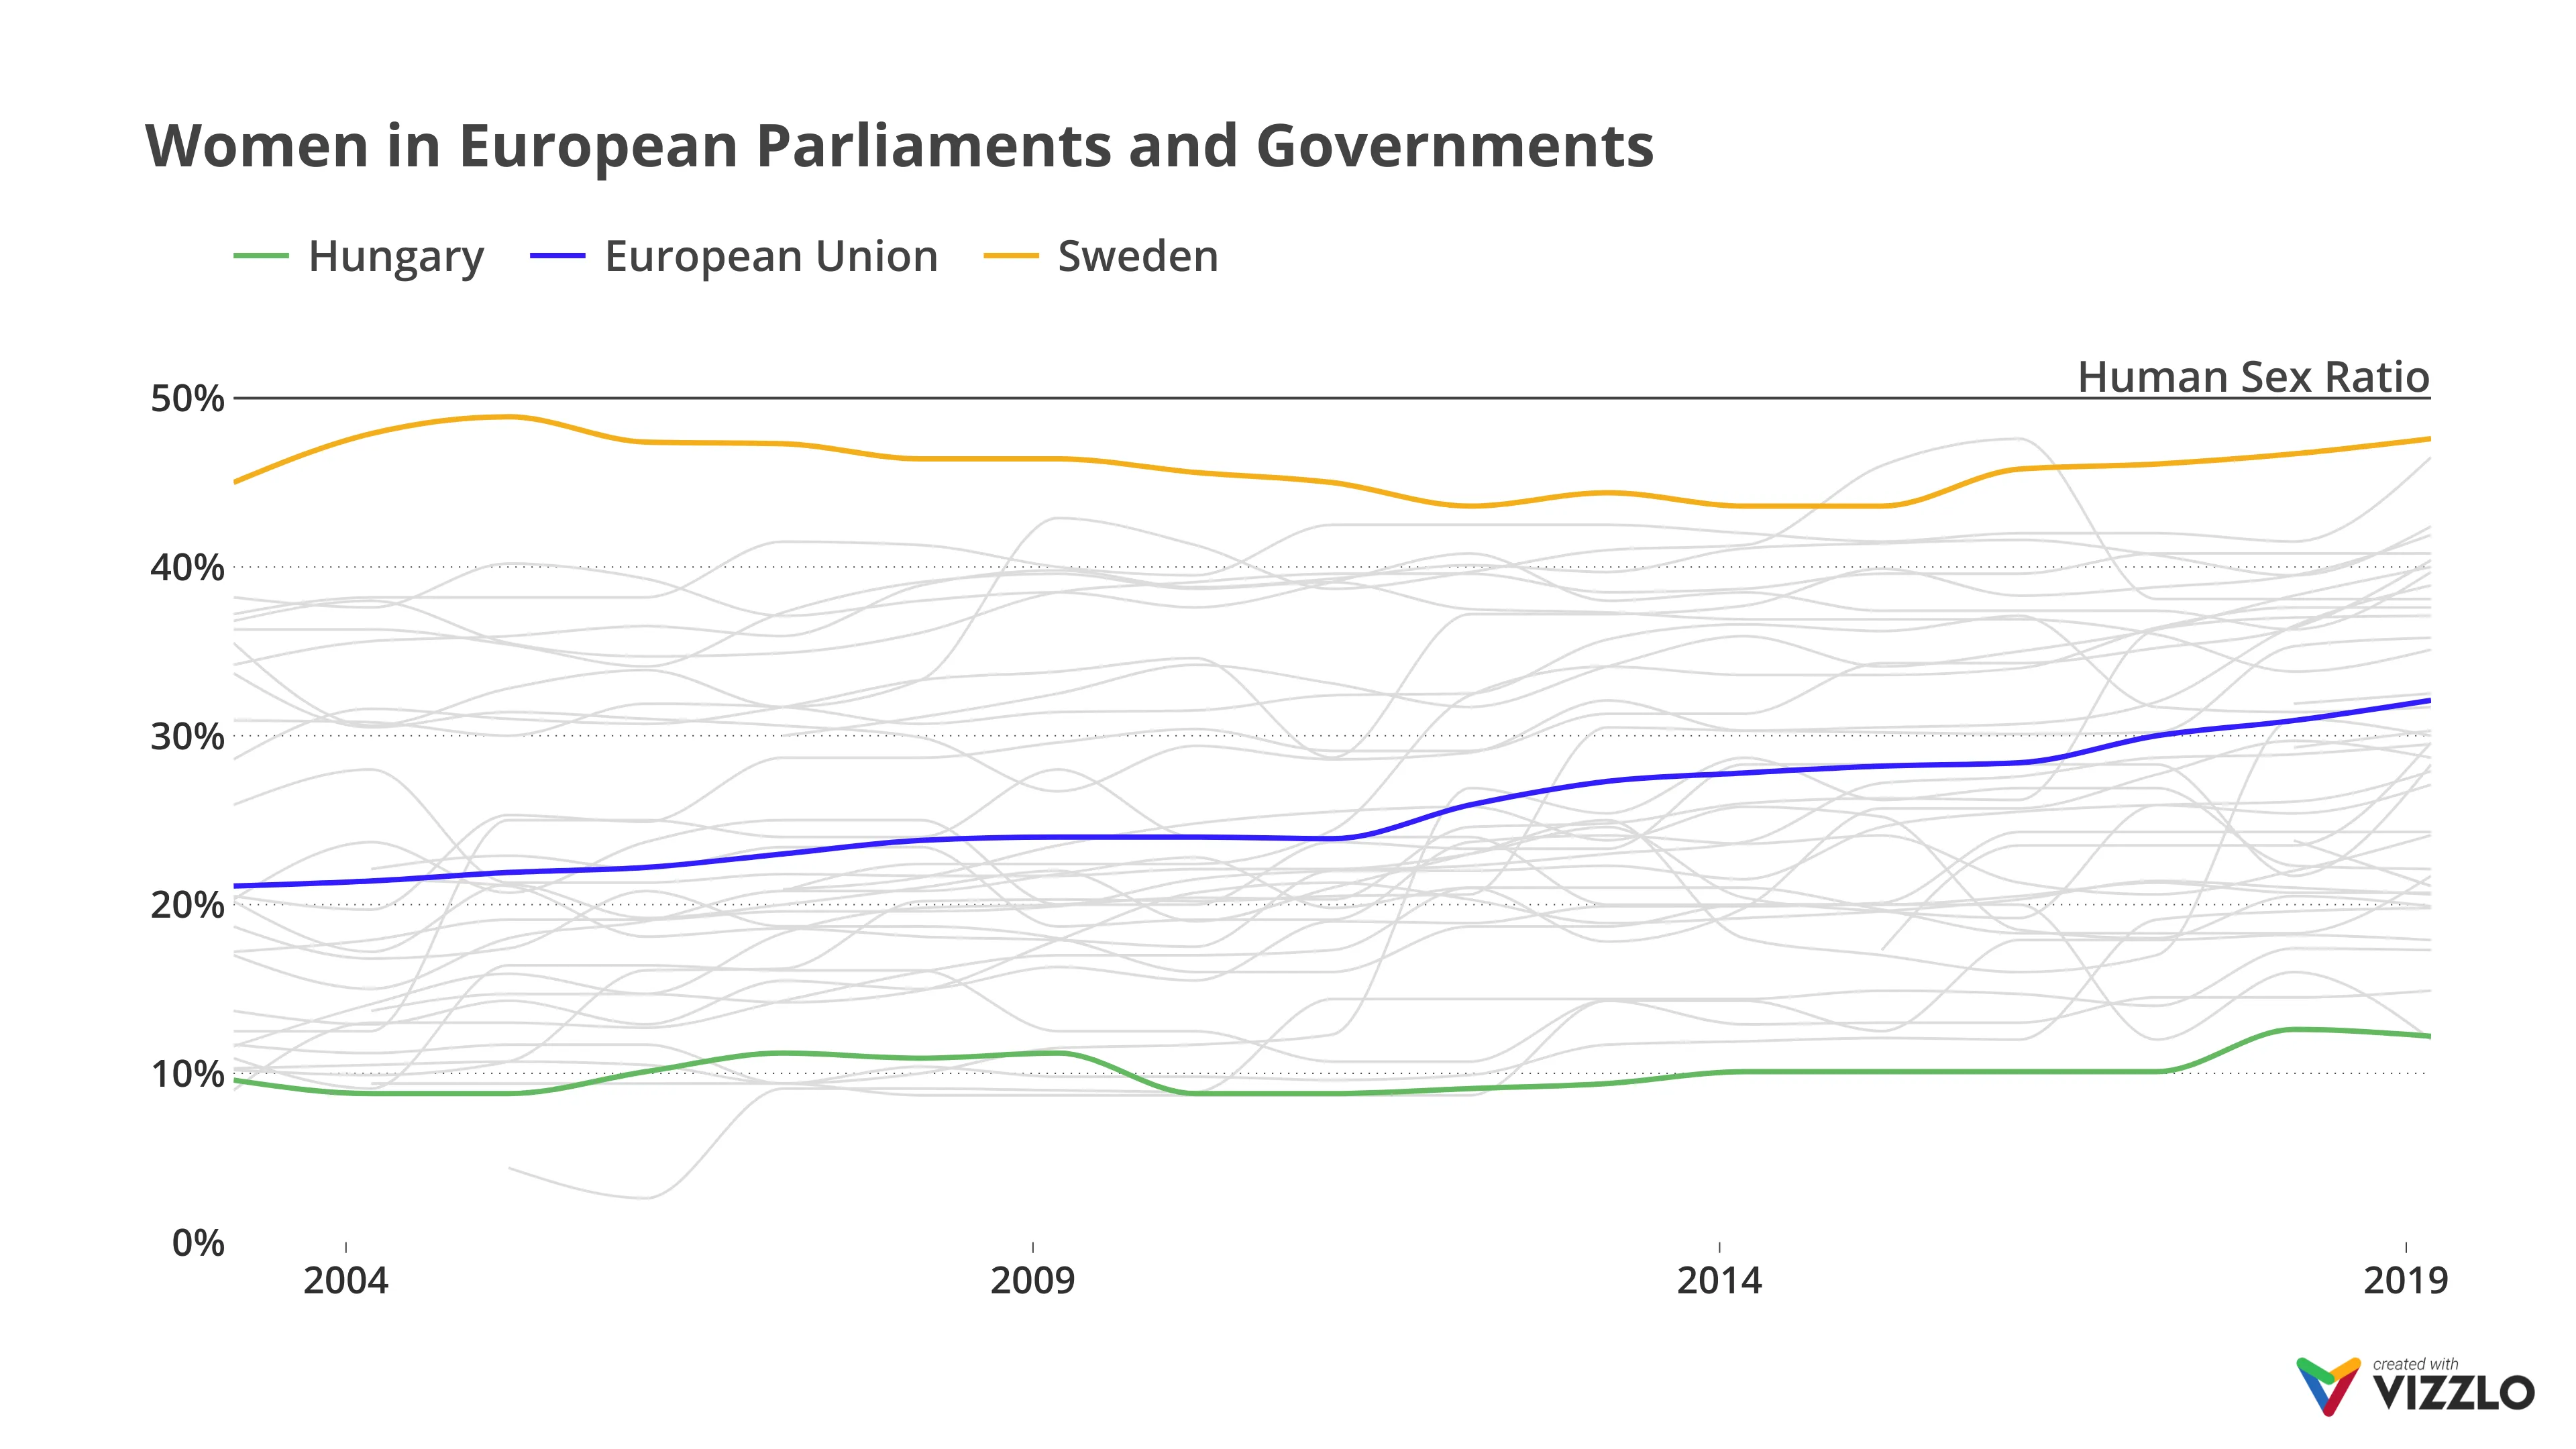 Women in European Parliaments and Governments